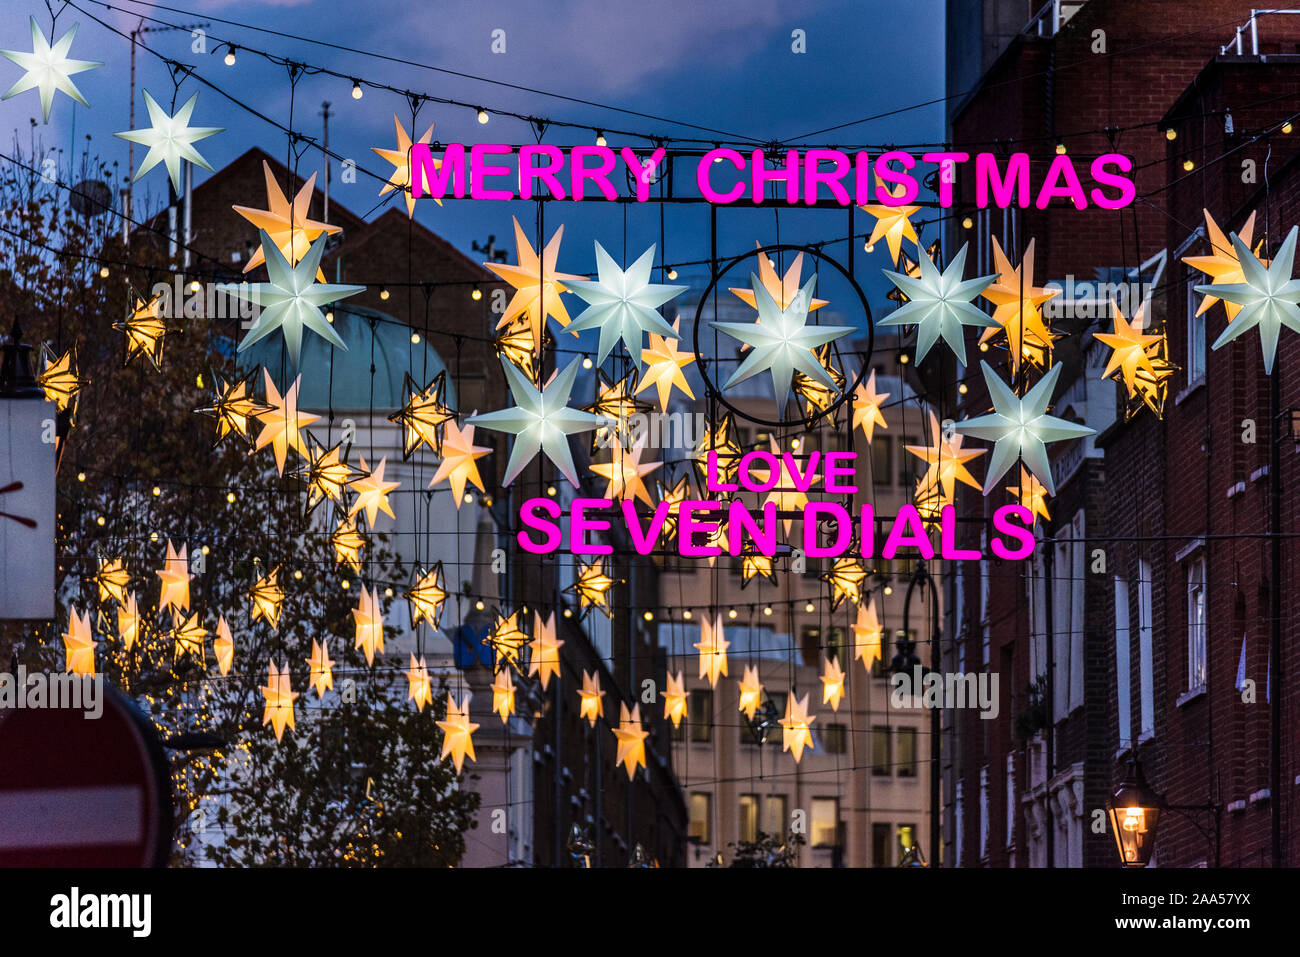 Seven Dials London - Christmas Lights in the Seven Dials area of central London Stock Photo